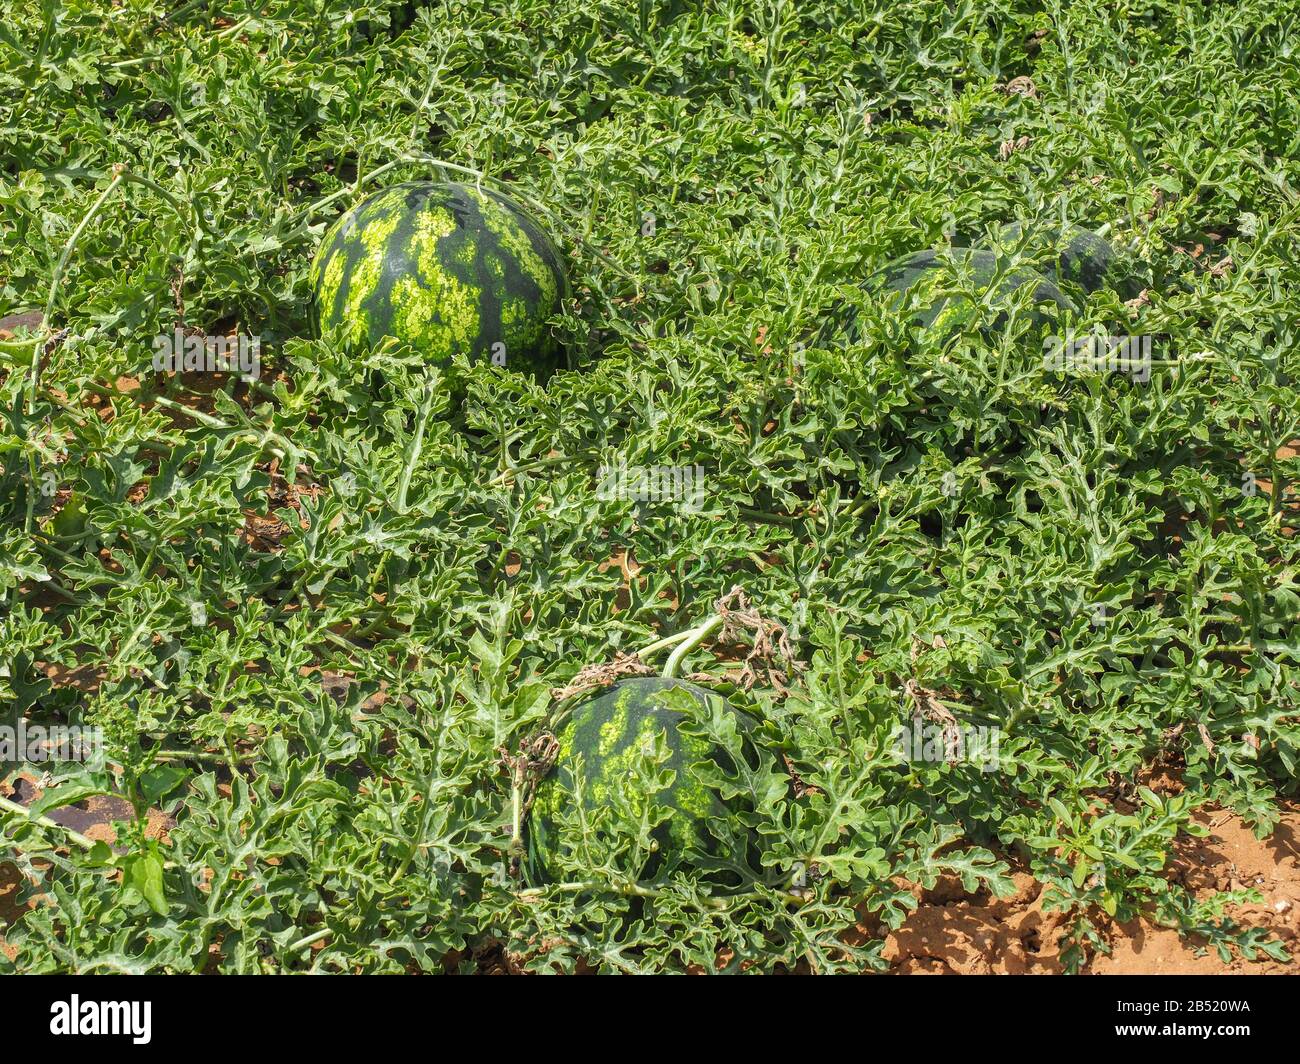 Fresh Watermelon or Citrullus lanatus is a vine-like flowering plant in the family Cucurbitaceae. Fresh large green watermelons growing in the field. Stock Photo